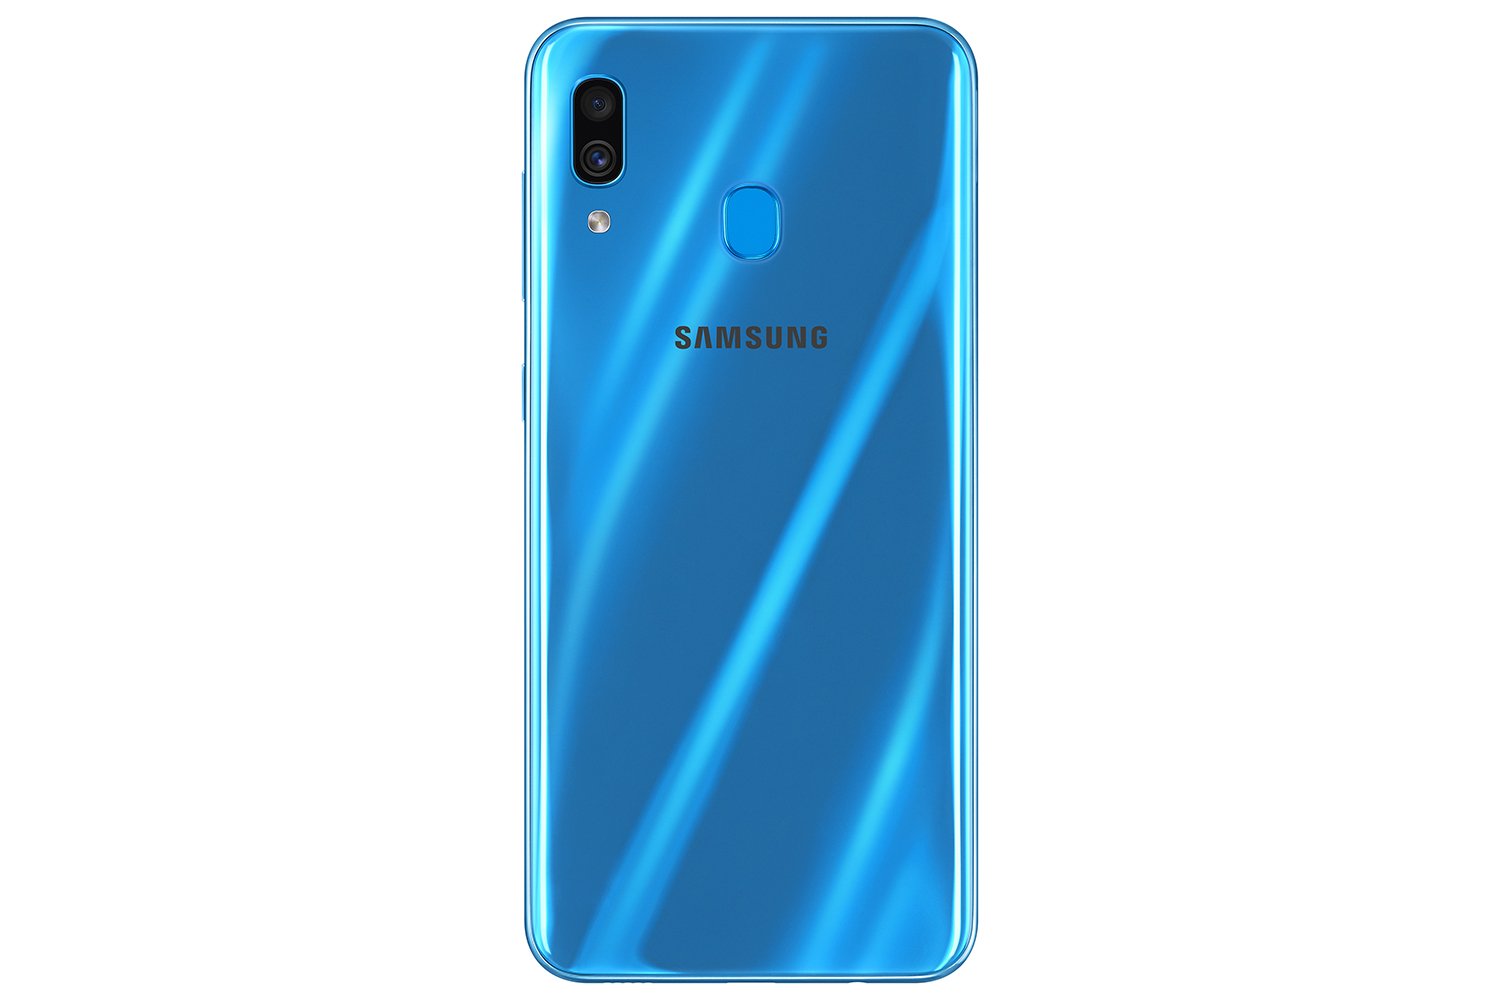 Samsung Galaxy A30 specs, review, release date - PhonesData